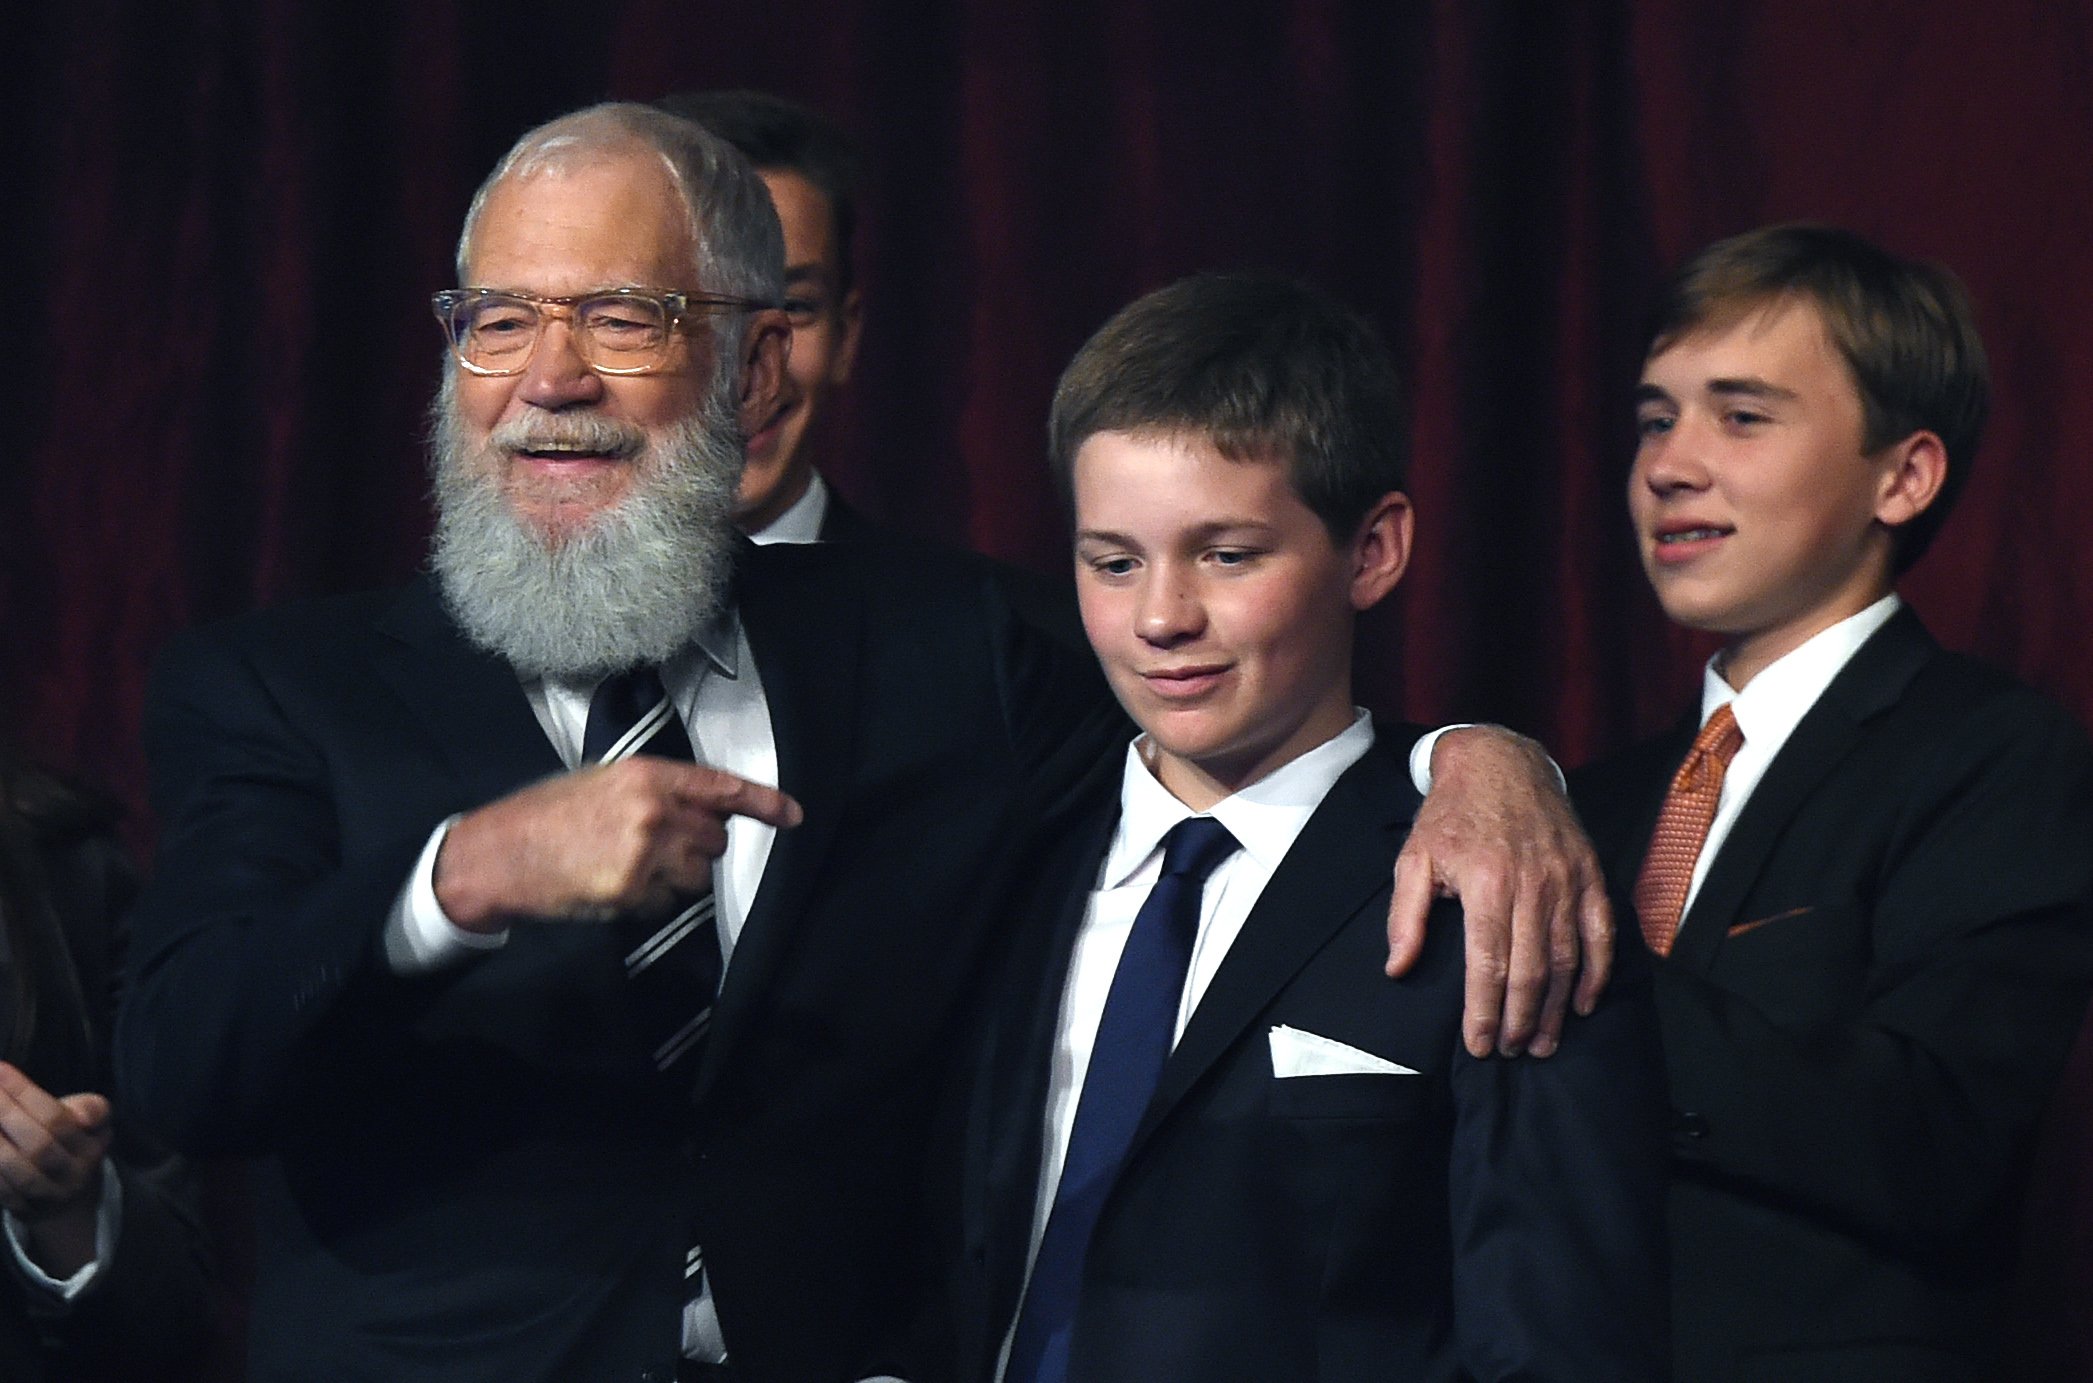 David Letterman with his son Harry Joseph at the 20th Annual Mark Twain Prize for American Humor in Washington, DC, on October 22, 2017. I Source: Getty Images